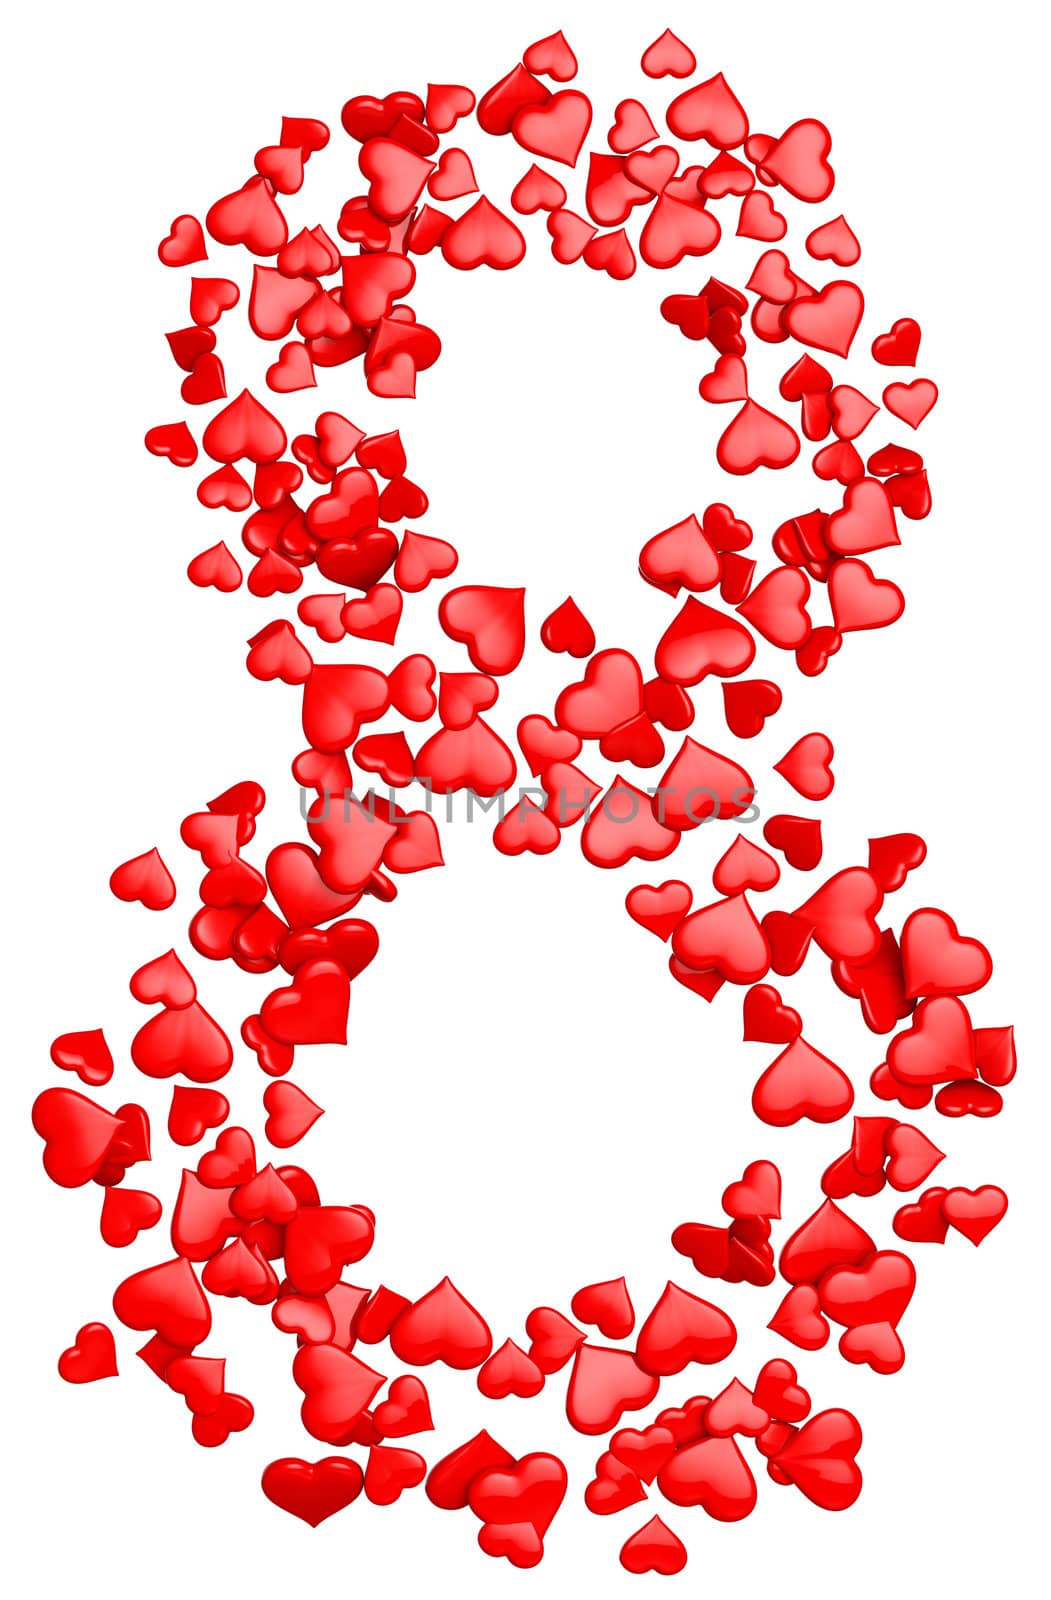 digit eight consisting of red hearts as element of decorations for March 8. International Women's Day